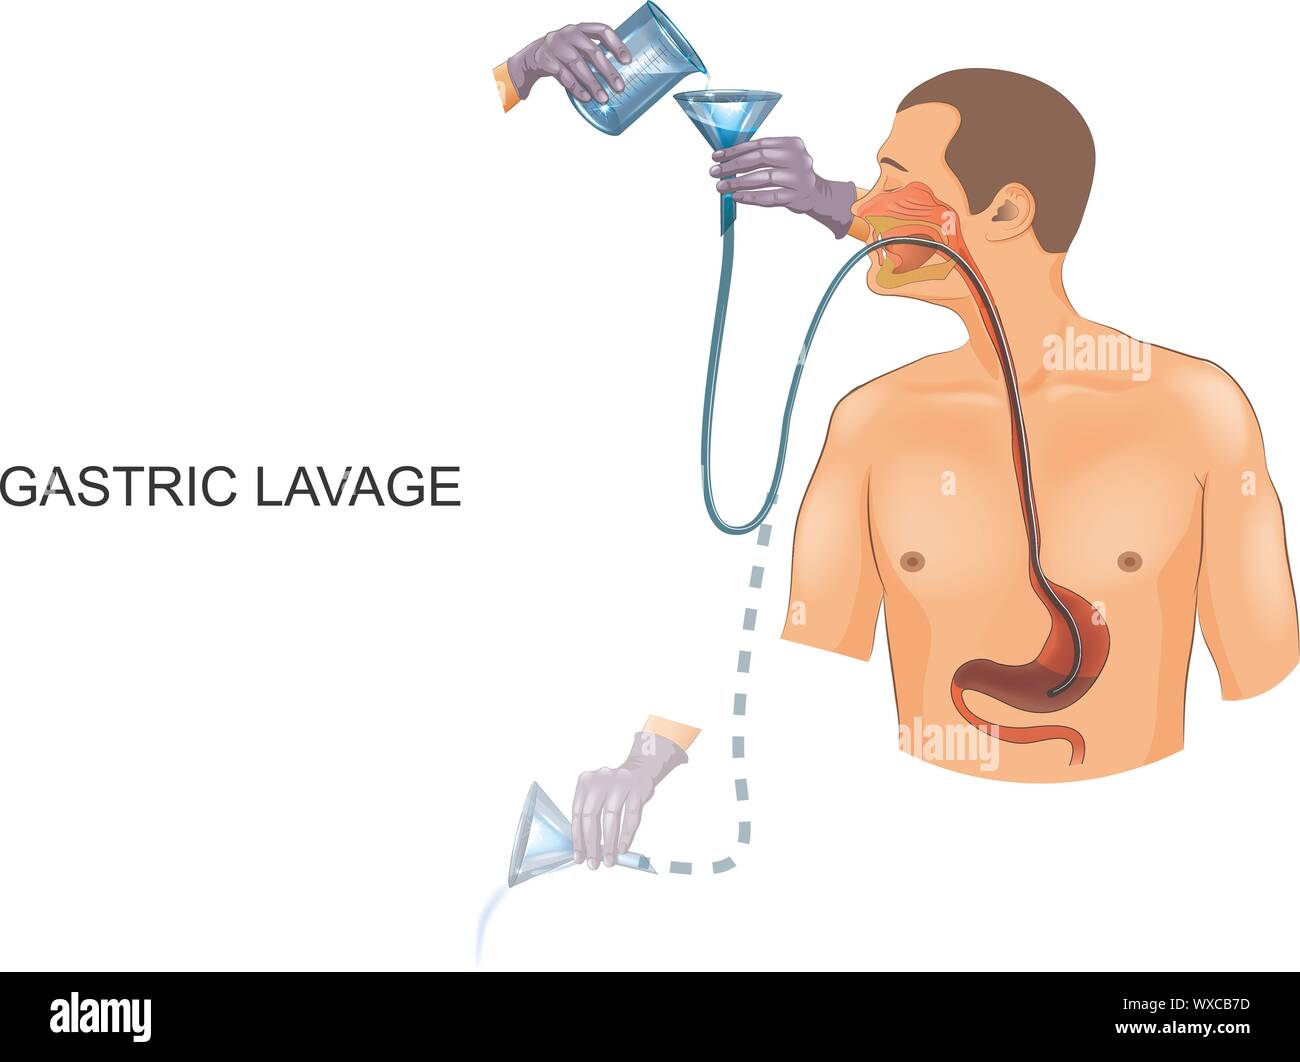 vector illustration of gastric lavage with a gastric tube Stock Vector